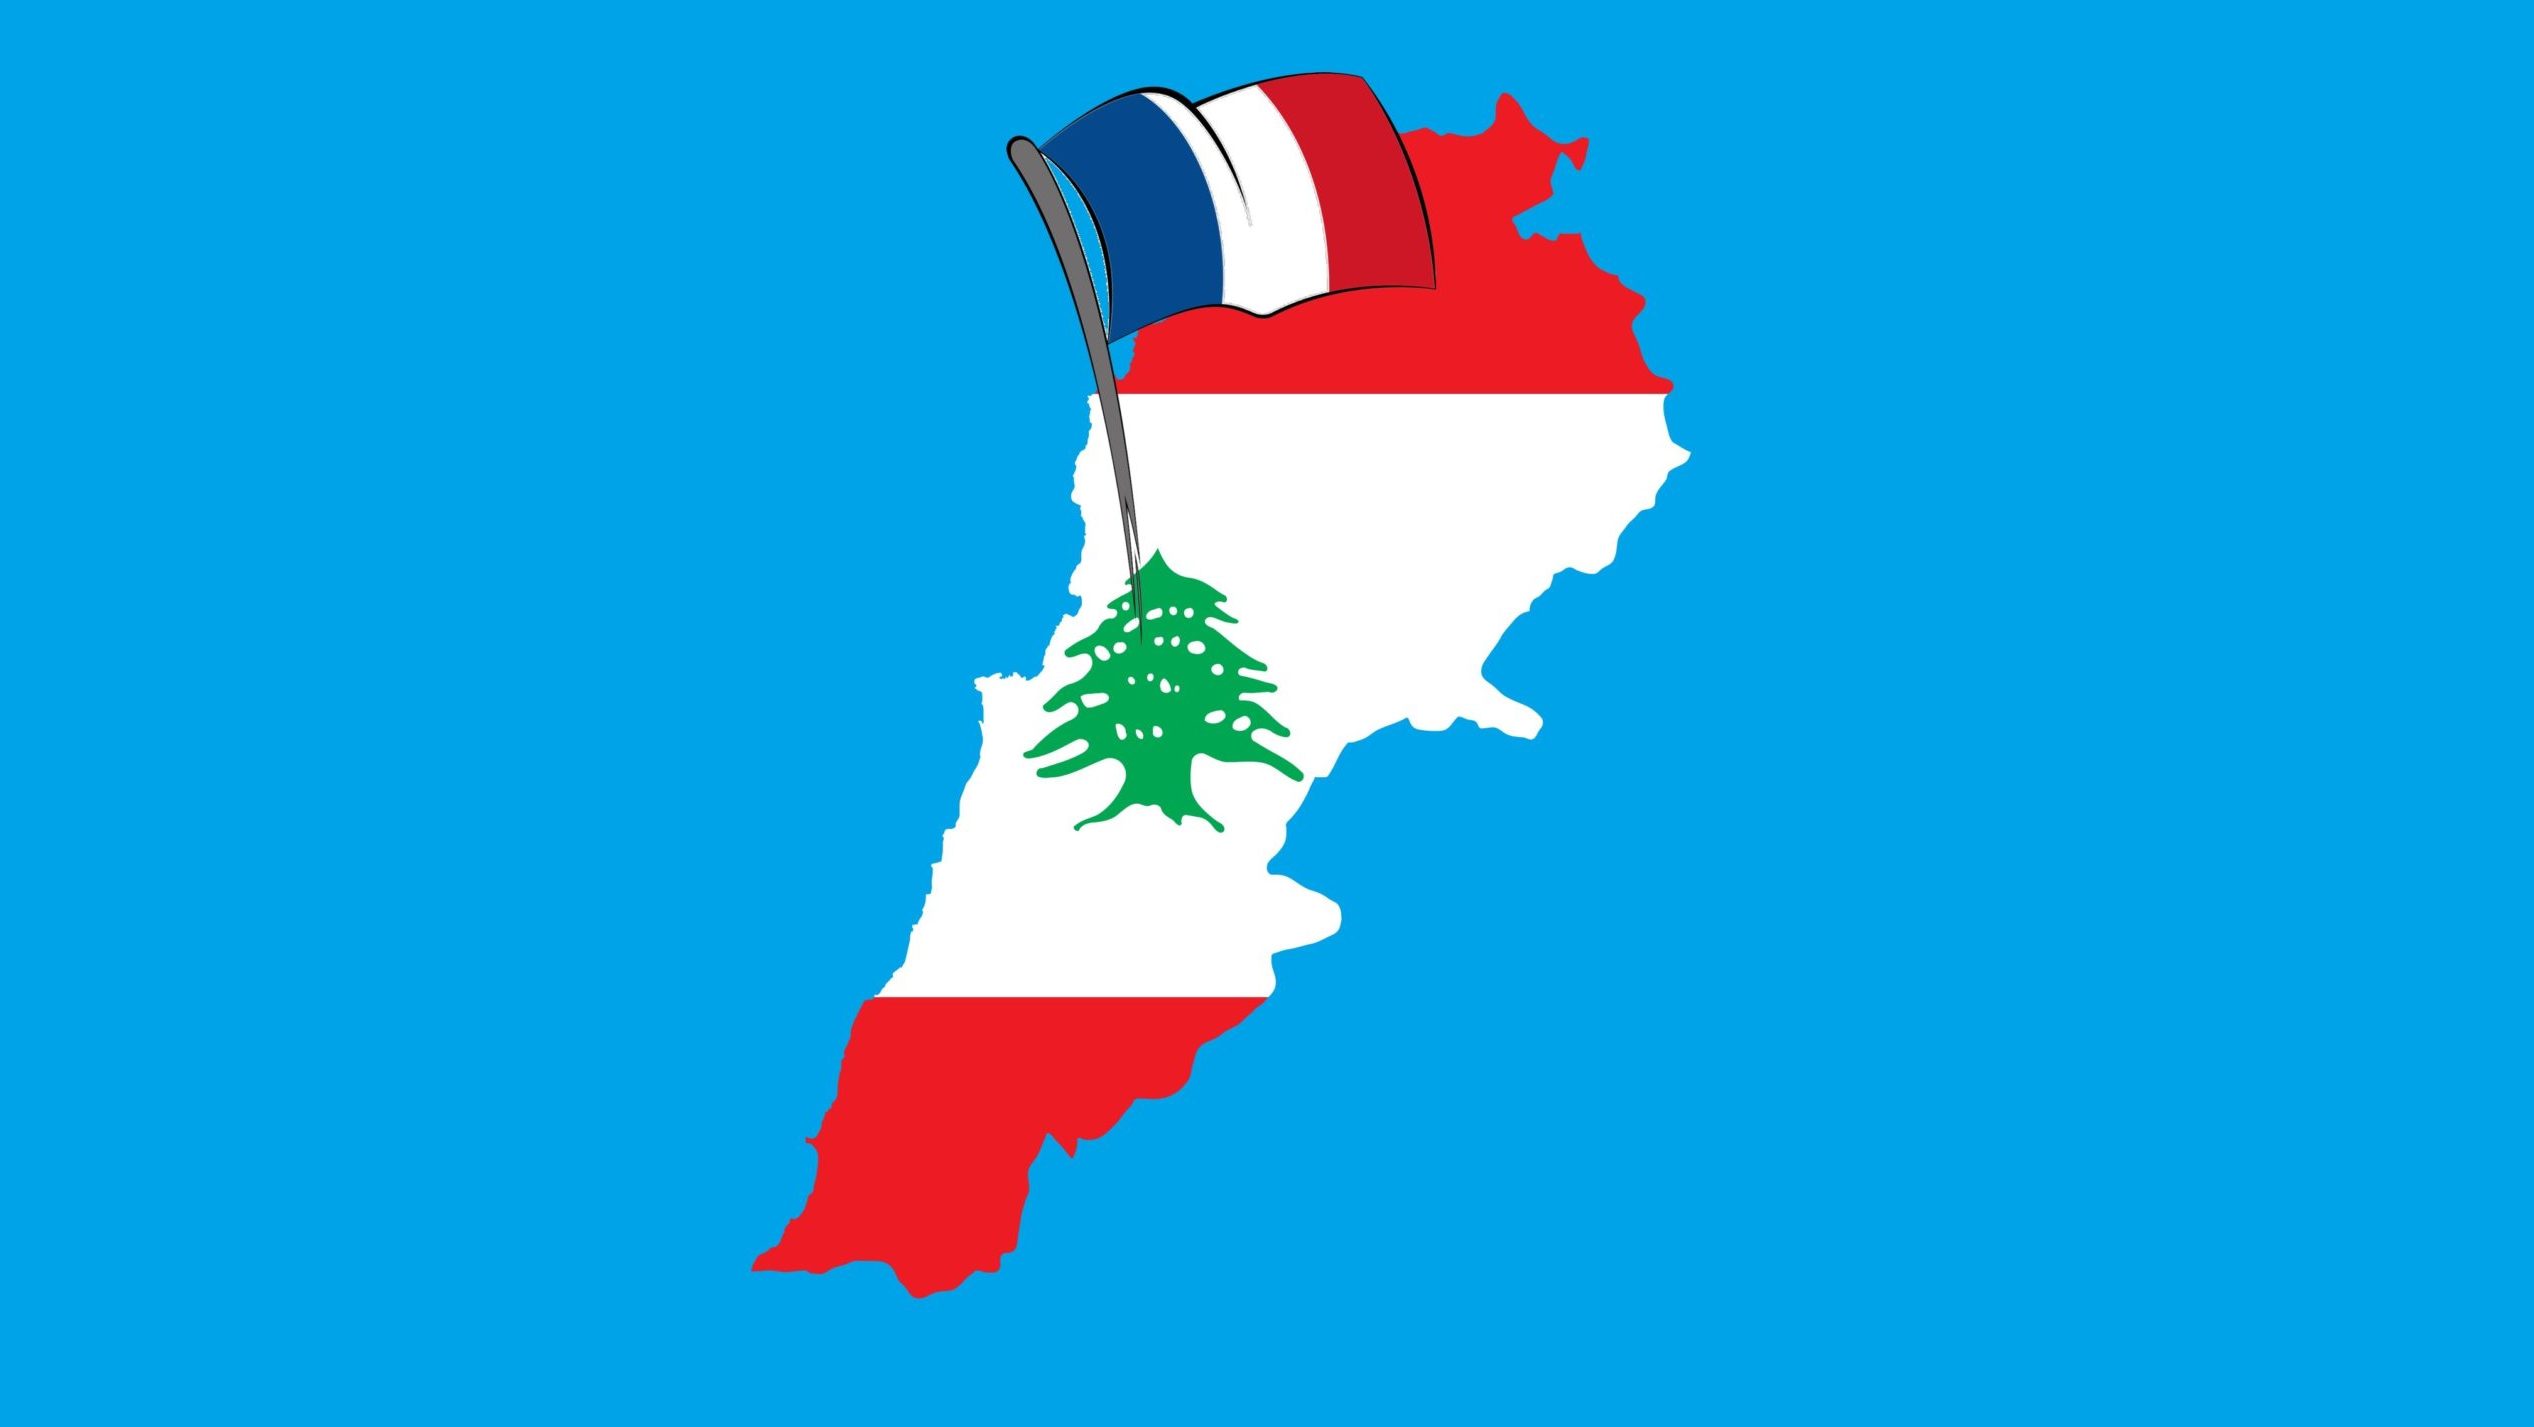 Lebanese Eager for French Leadership in Absence of Their Own